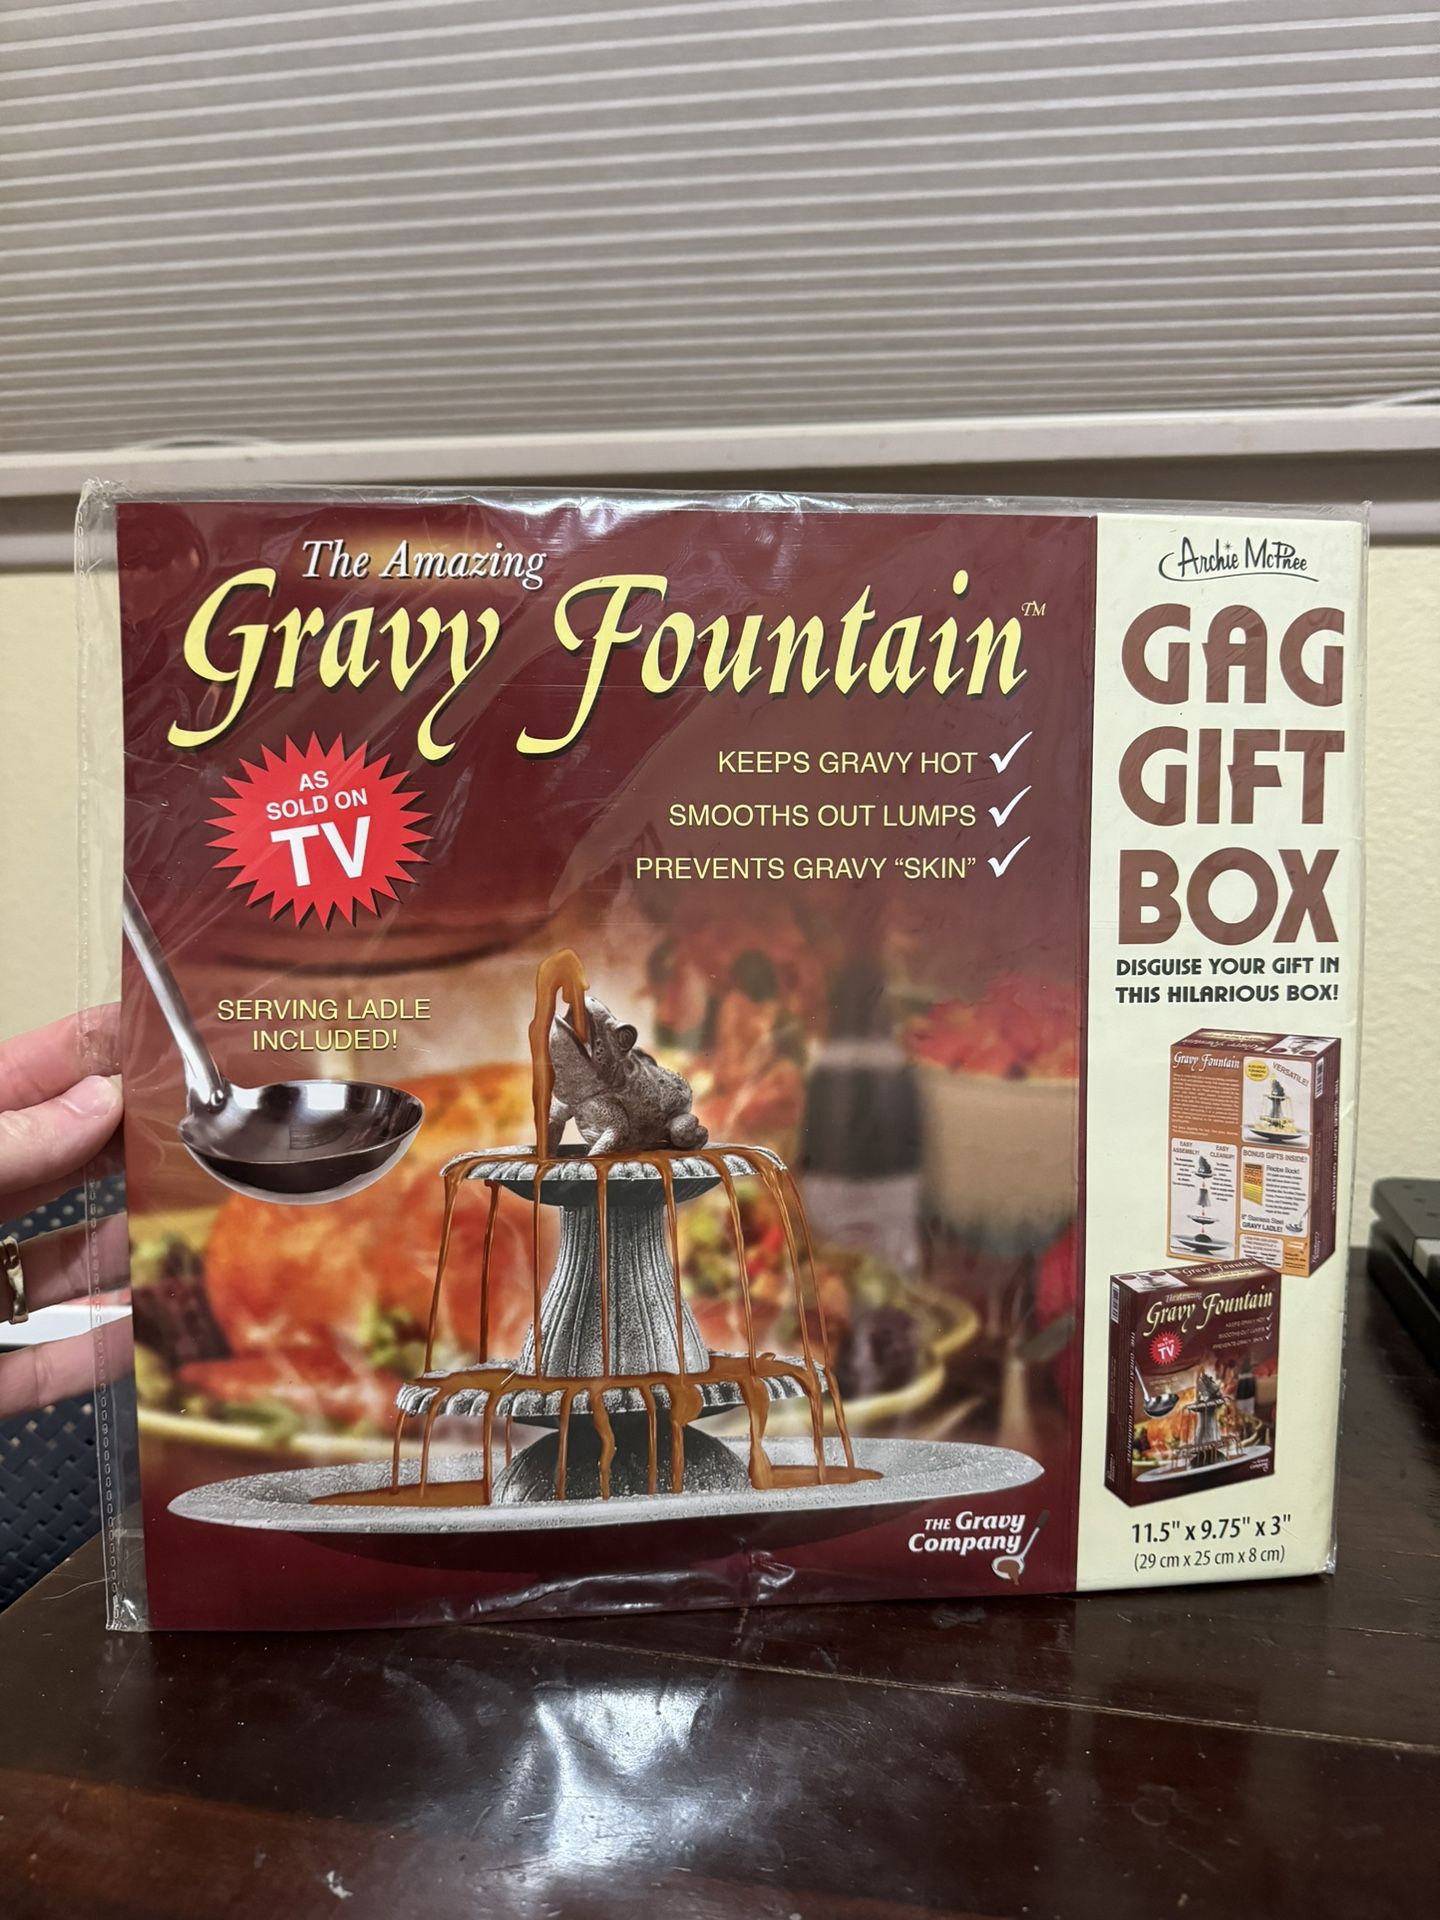 The Amazing Gravy Fountain Gag Gift Box New in Packaging 